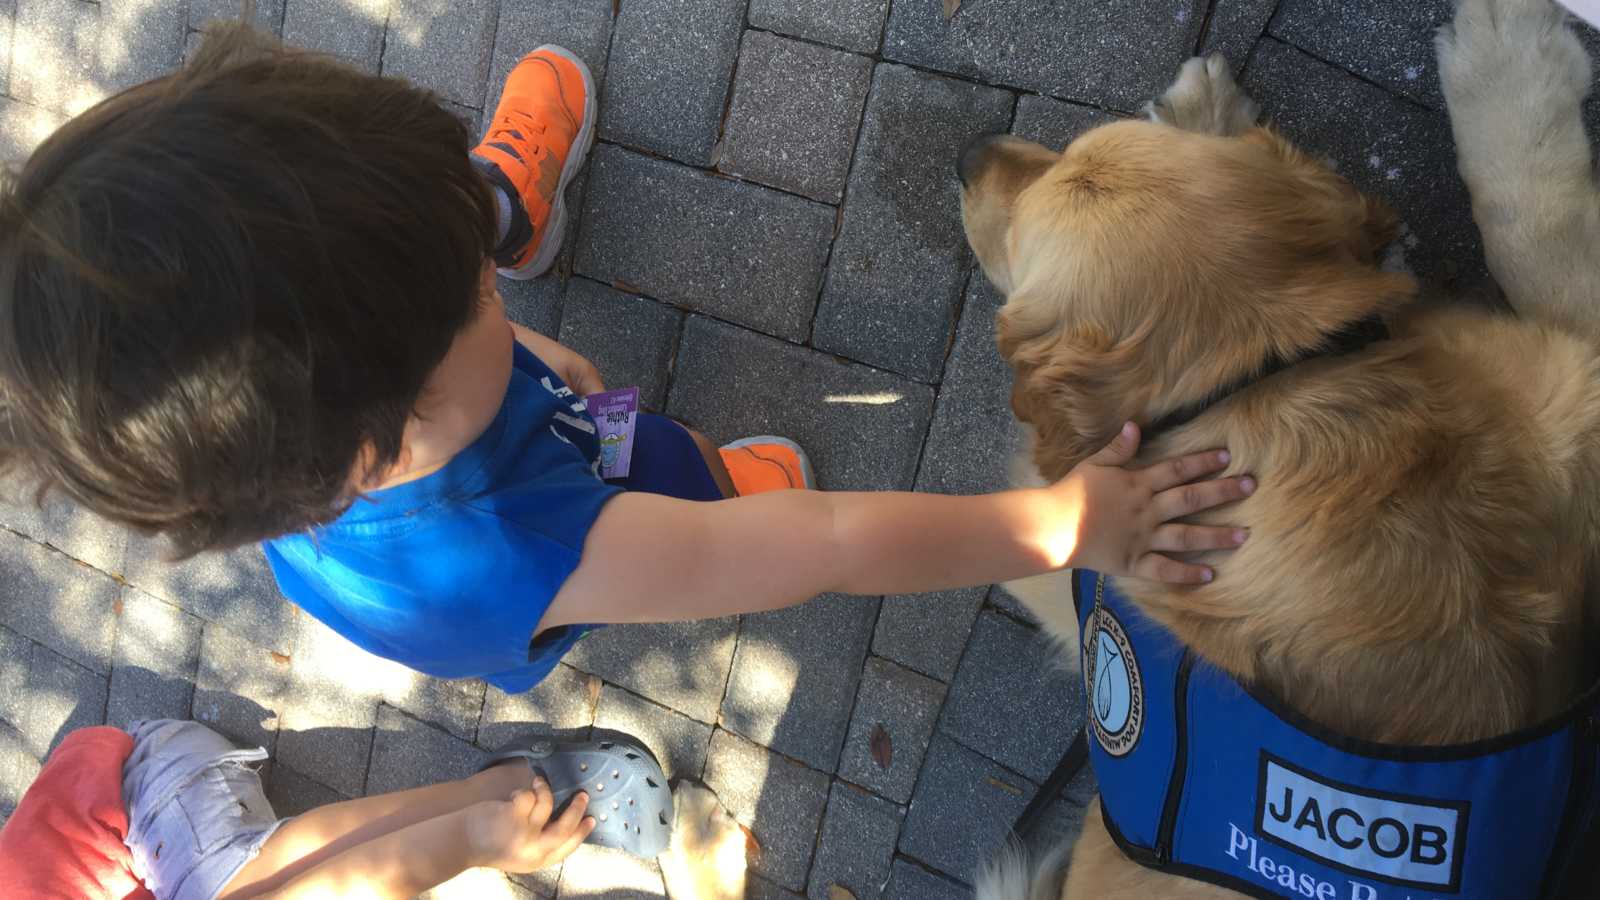 support dog with vest that says, "Jacaob" lies on ground while young boy pets his back